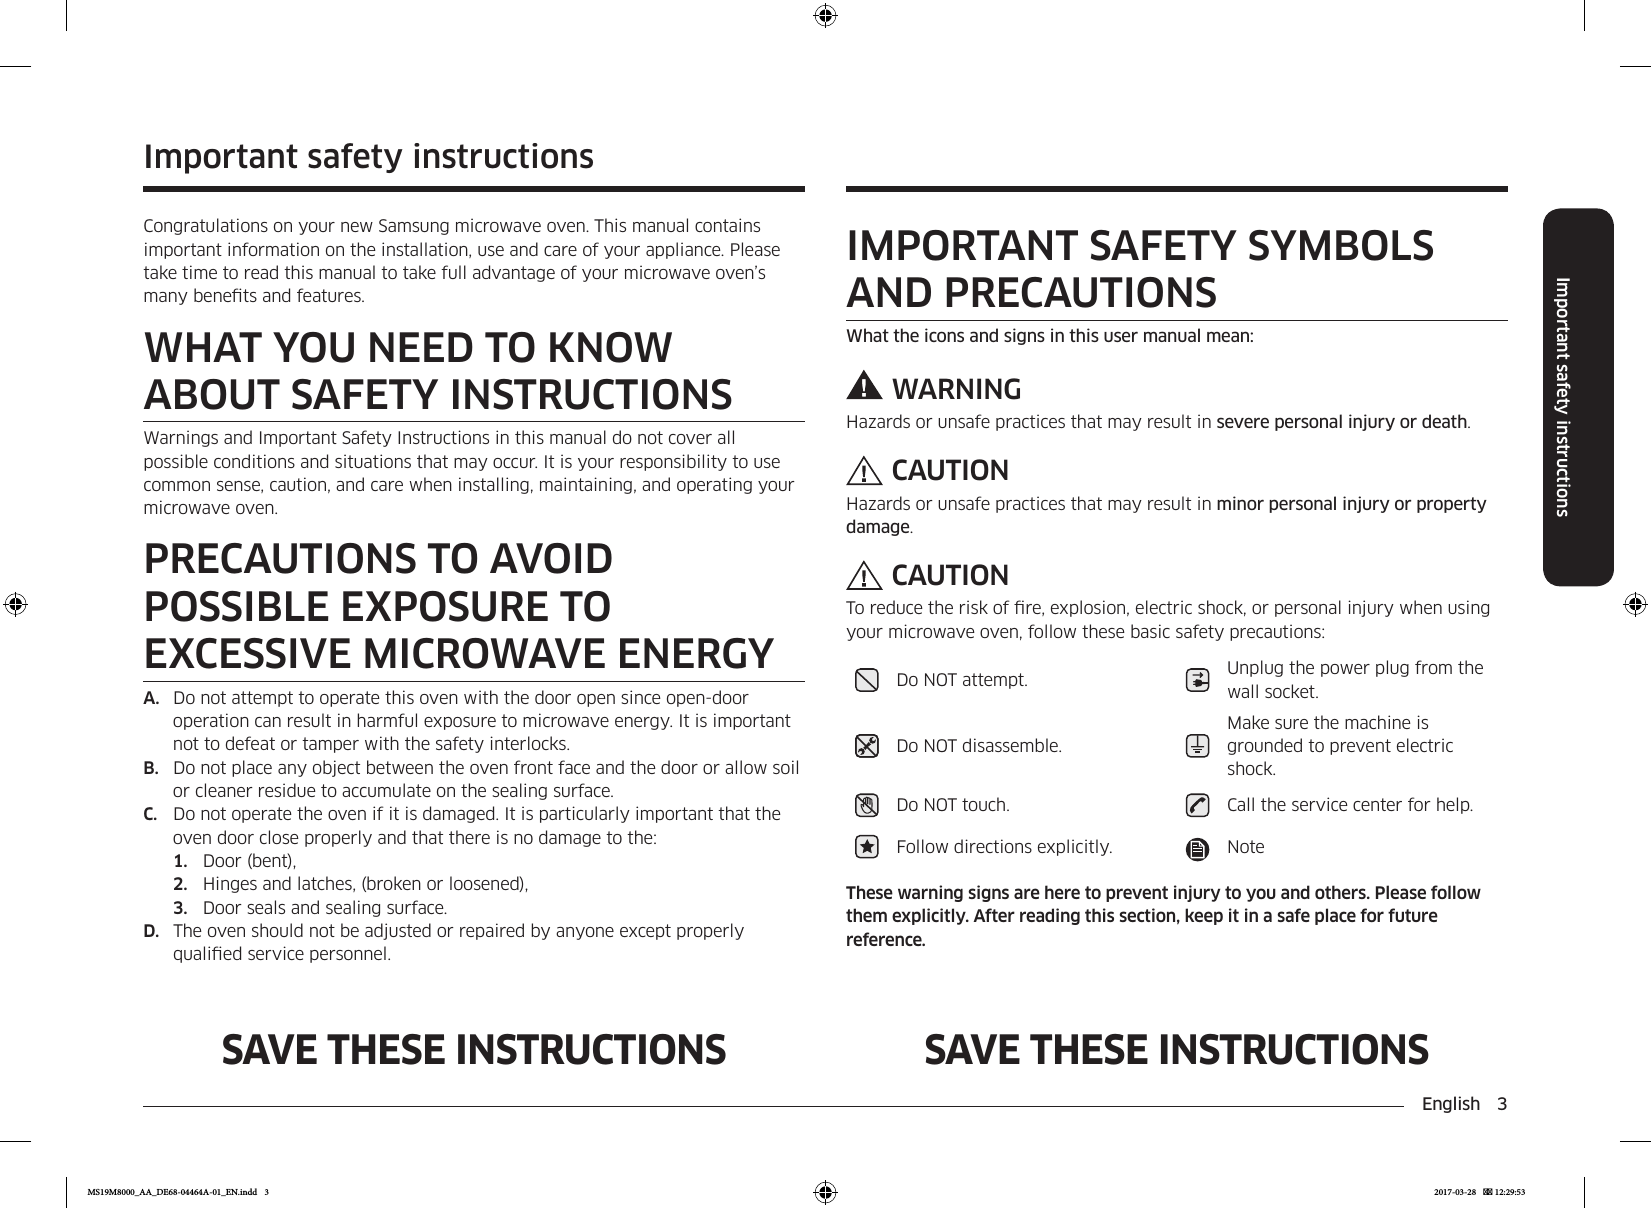 English  3Important safety instructionsSAVE THESE INSTRUCTIONS SAVE THESE INSTRUCTIONSImportant safety instructionsCongratulations on your new Samsung microwave oven. This manual contains important information on the installation, use and care of your appliance. Please take time to read this manual to take full advantage of your microwave oven’s many benets and features.WHAT YOU NEED TO KNOW ABOUT SAFETY INSTRUCTIONSWarnings and Important Safety Instructions in this manual do not cover all possible conditions and situations that may occur. It is your responsibility to use common sense, caution, and care when installing, maintaining, and operating your microwave oven.PRECAUTIONS TO AVOID POSSIBLE EXPOSURE TO EXCESSIVE MICROWAVE ENERGYA.  Do not attempt to operate this oven with the door open since open-door operation can result in harmful exposure to microwave energy. It is important not to defeat or tamper with the safety interlocks.B.  Do not place any object between the oven front face and the door or allow soil or cleaner residue to accumulate on the sealing surface.C.  Do not operate the oven if it is damaged. It is particularly important that the oven door close properly and that there is no damage to the:1.  Door (bent),2.  Hinges and latches, (broken or loosened),3.  Door seals and sealing surface.D.  The oven should not be adjusted or repaired by anyone except properly qualied service personnel.IMPORTANT SAFETY SYMBOLS AND PRECAUTIONSWhat the icons and signs in this user manual mean:WARNINGHazards or unsafe practices that may result in severe personal injury or death.CAUTIONHazards or unsafe practices that may result in minor personal injury or property damage.CAUTIONTo reduce the risk of re, explosion, electric shock, or personal injury when using your microwave oven, follow these basic safety precautions:Do NOT attempt. Unplug the power plug from the wall socket.Do NOT disassemble.Make sure the machine is grounded to prevent electric shock.Do NOT touch. Call the service center for help.Follow directions explicitly. NoteThese warning signs are here to prevent injury to you and others. Please follow them explicitly. After reading this section, keep it in a safe place for future reference.MS19M8000_AA_DE68-04464A-01_EN.indd   3 2017-03-28    12:29:53